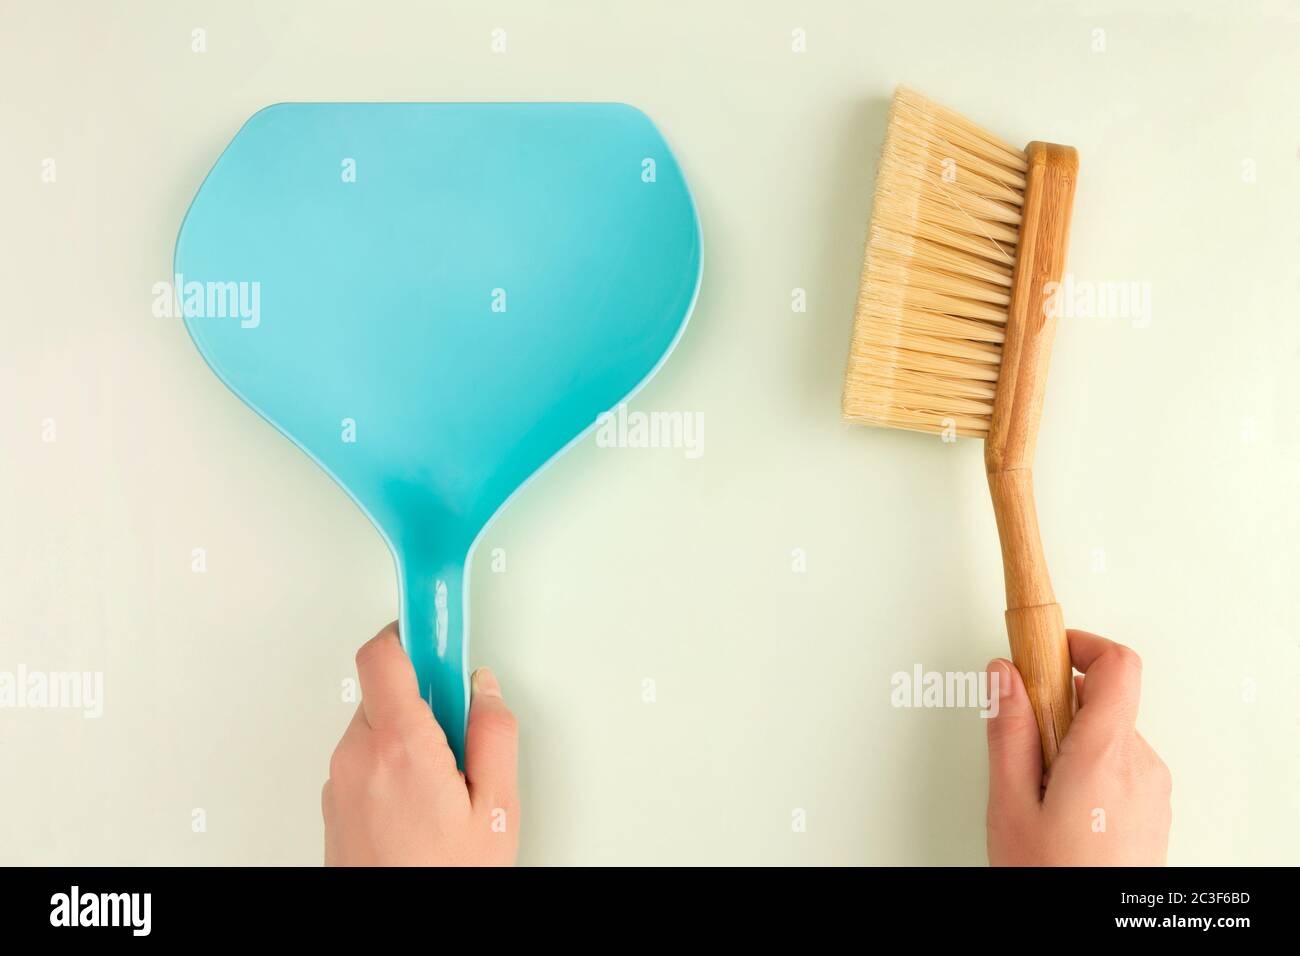 Plastic scoops and wooden brush in woman hands. Stock Photo